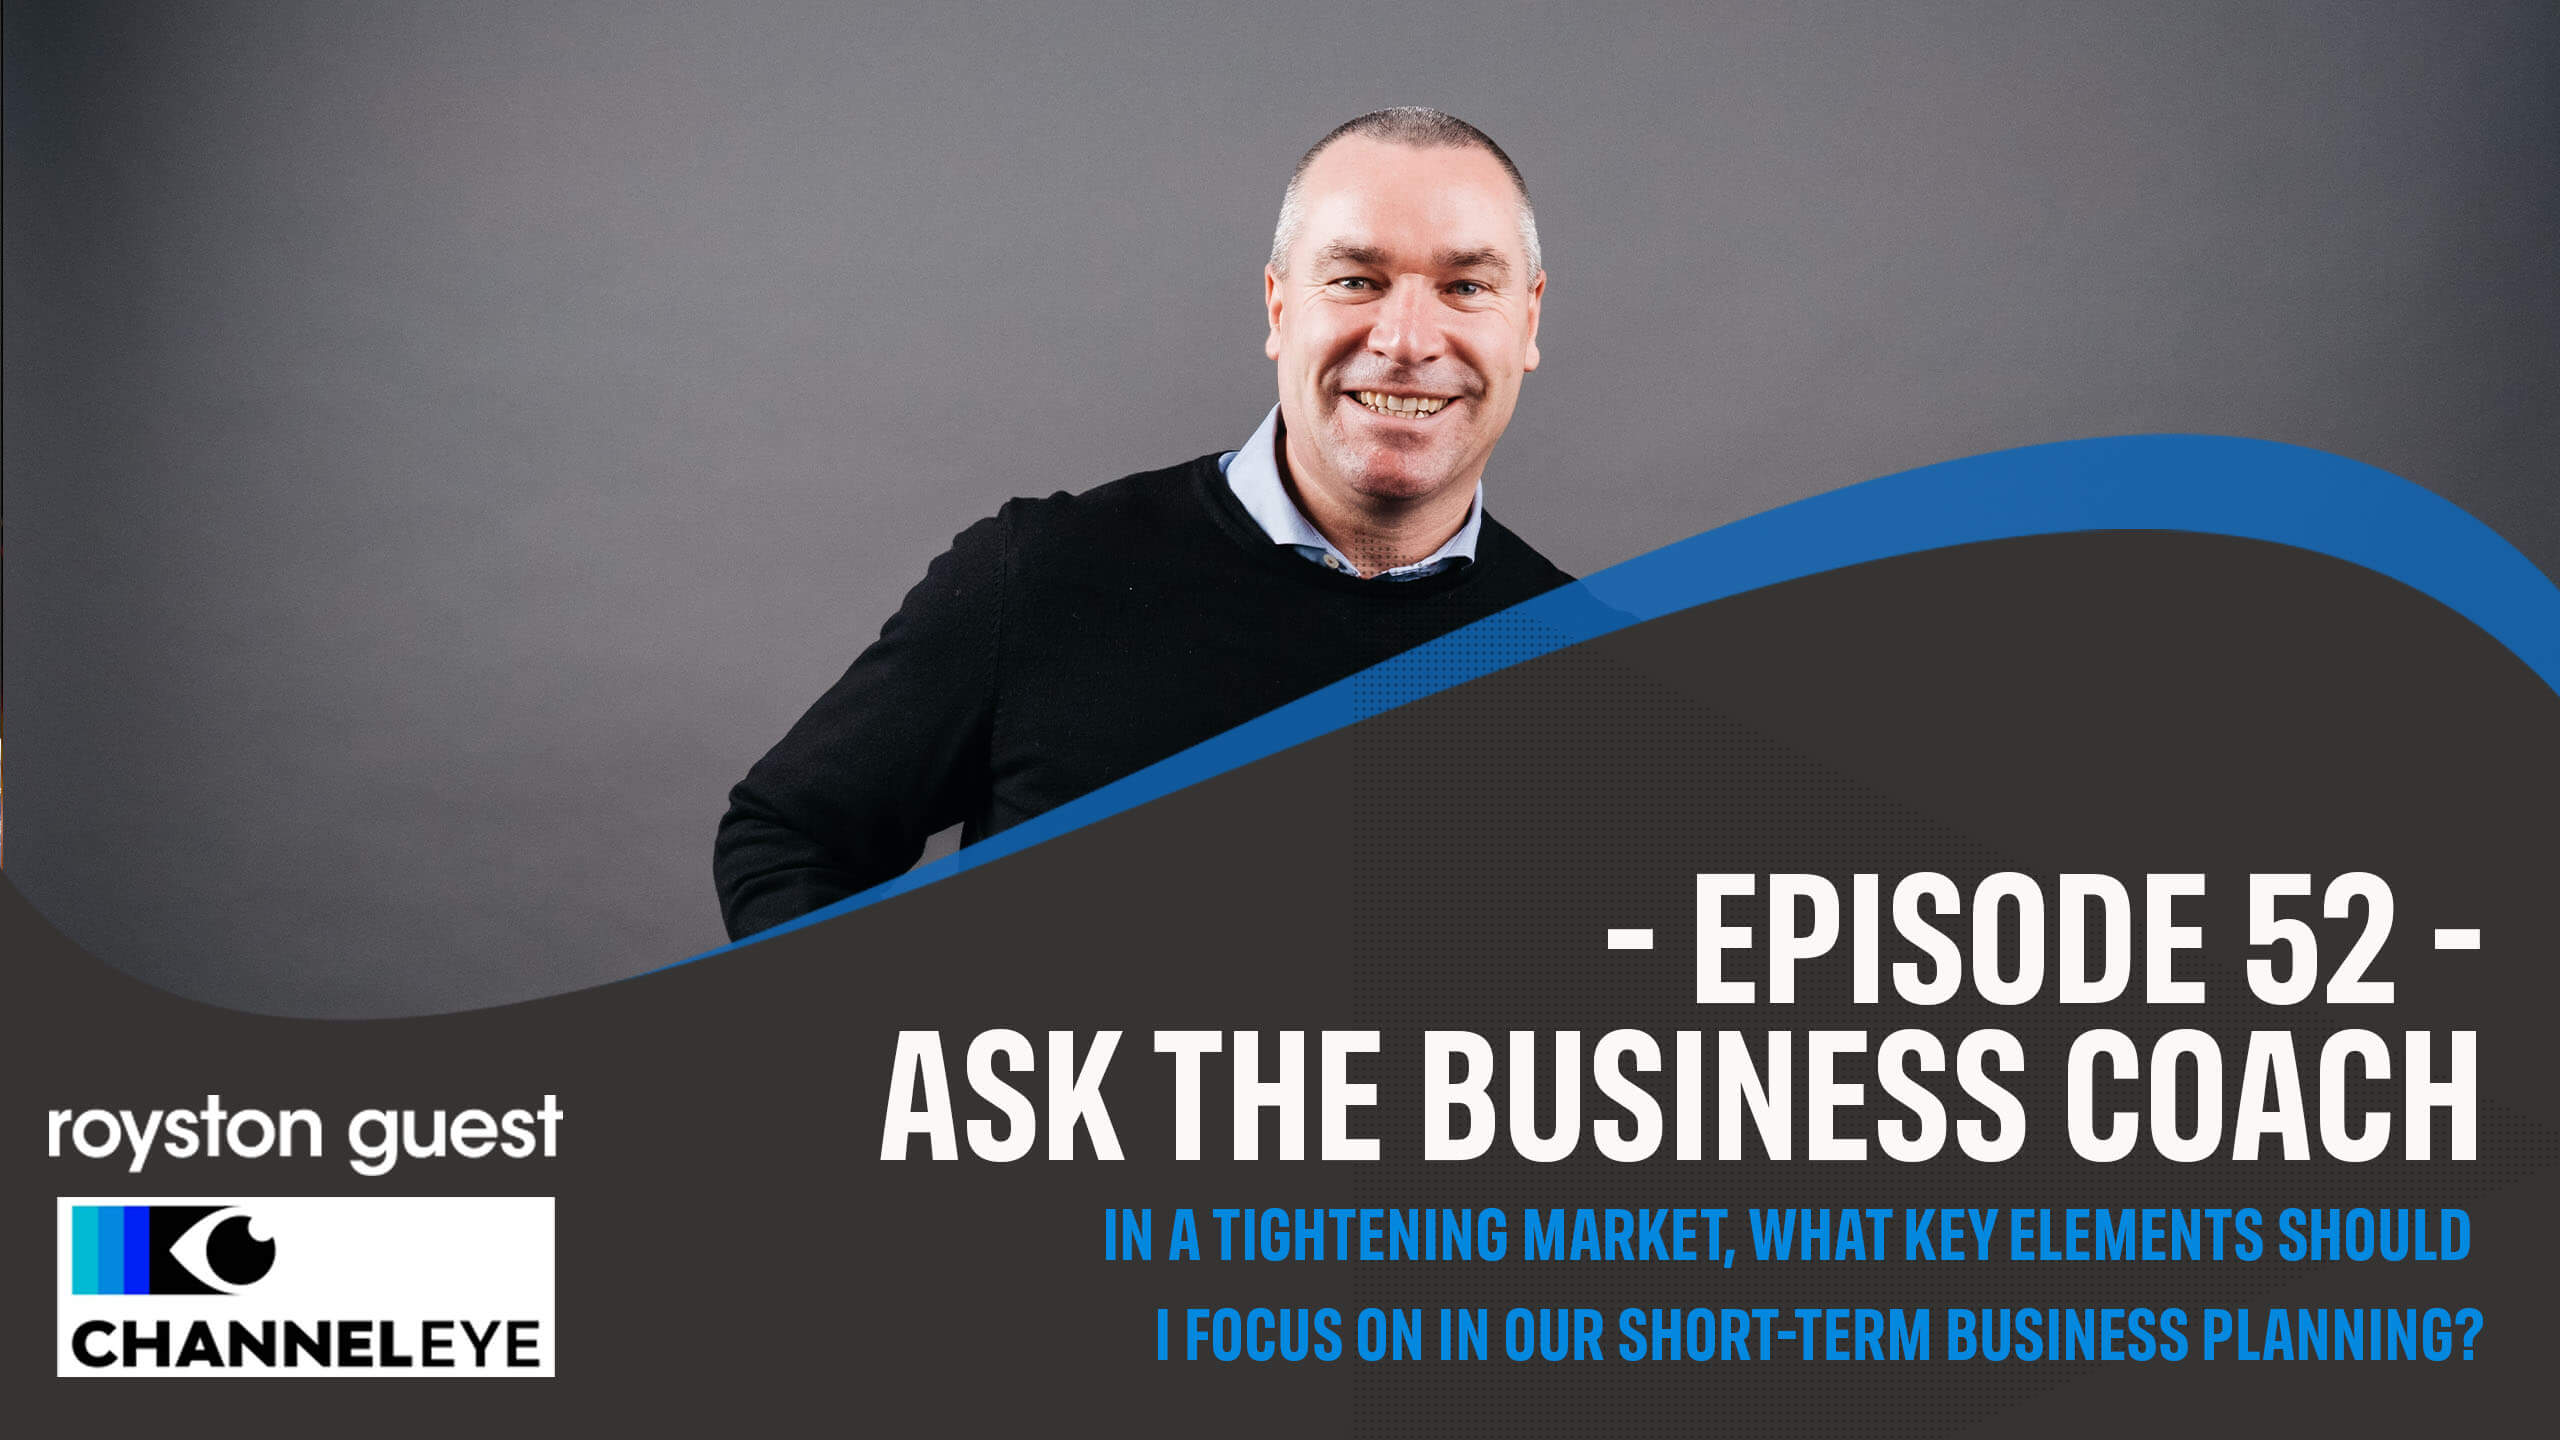 Ask the business coach Episode 52